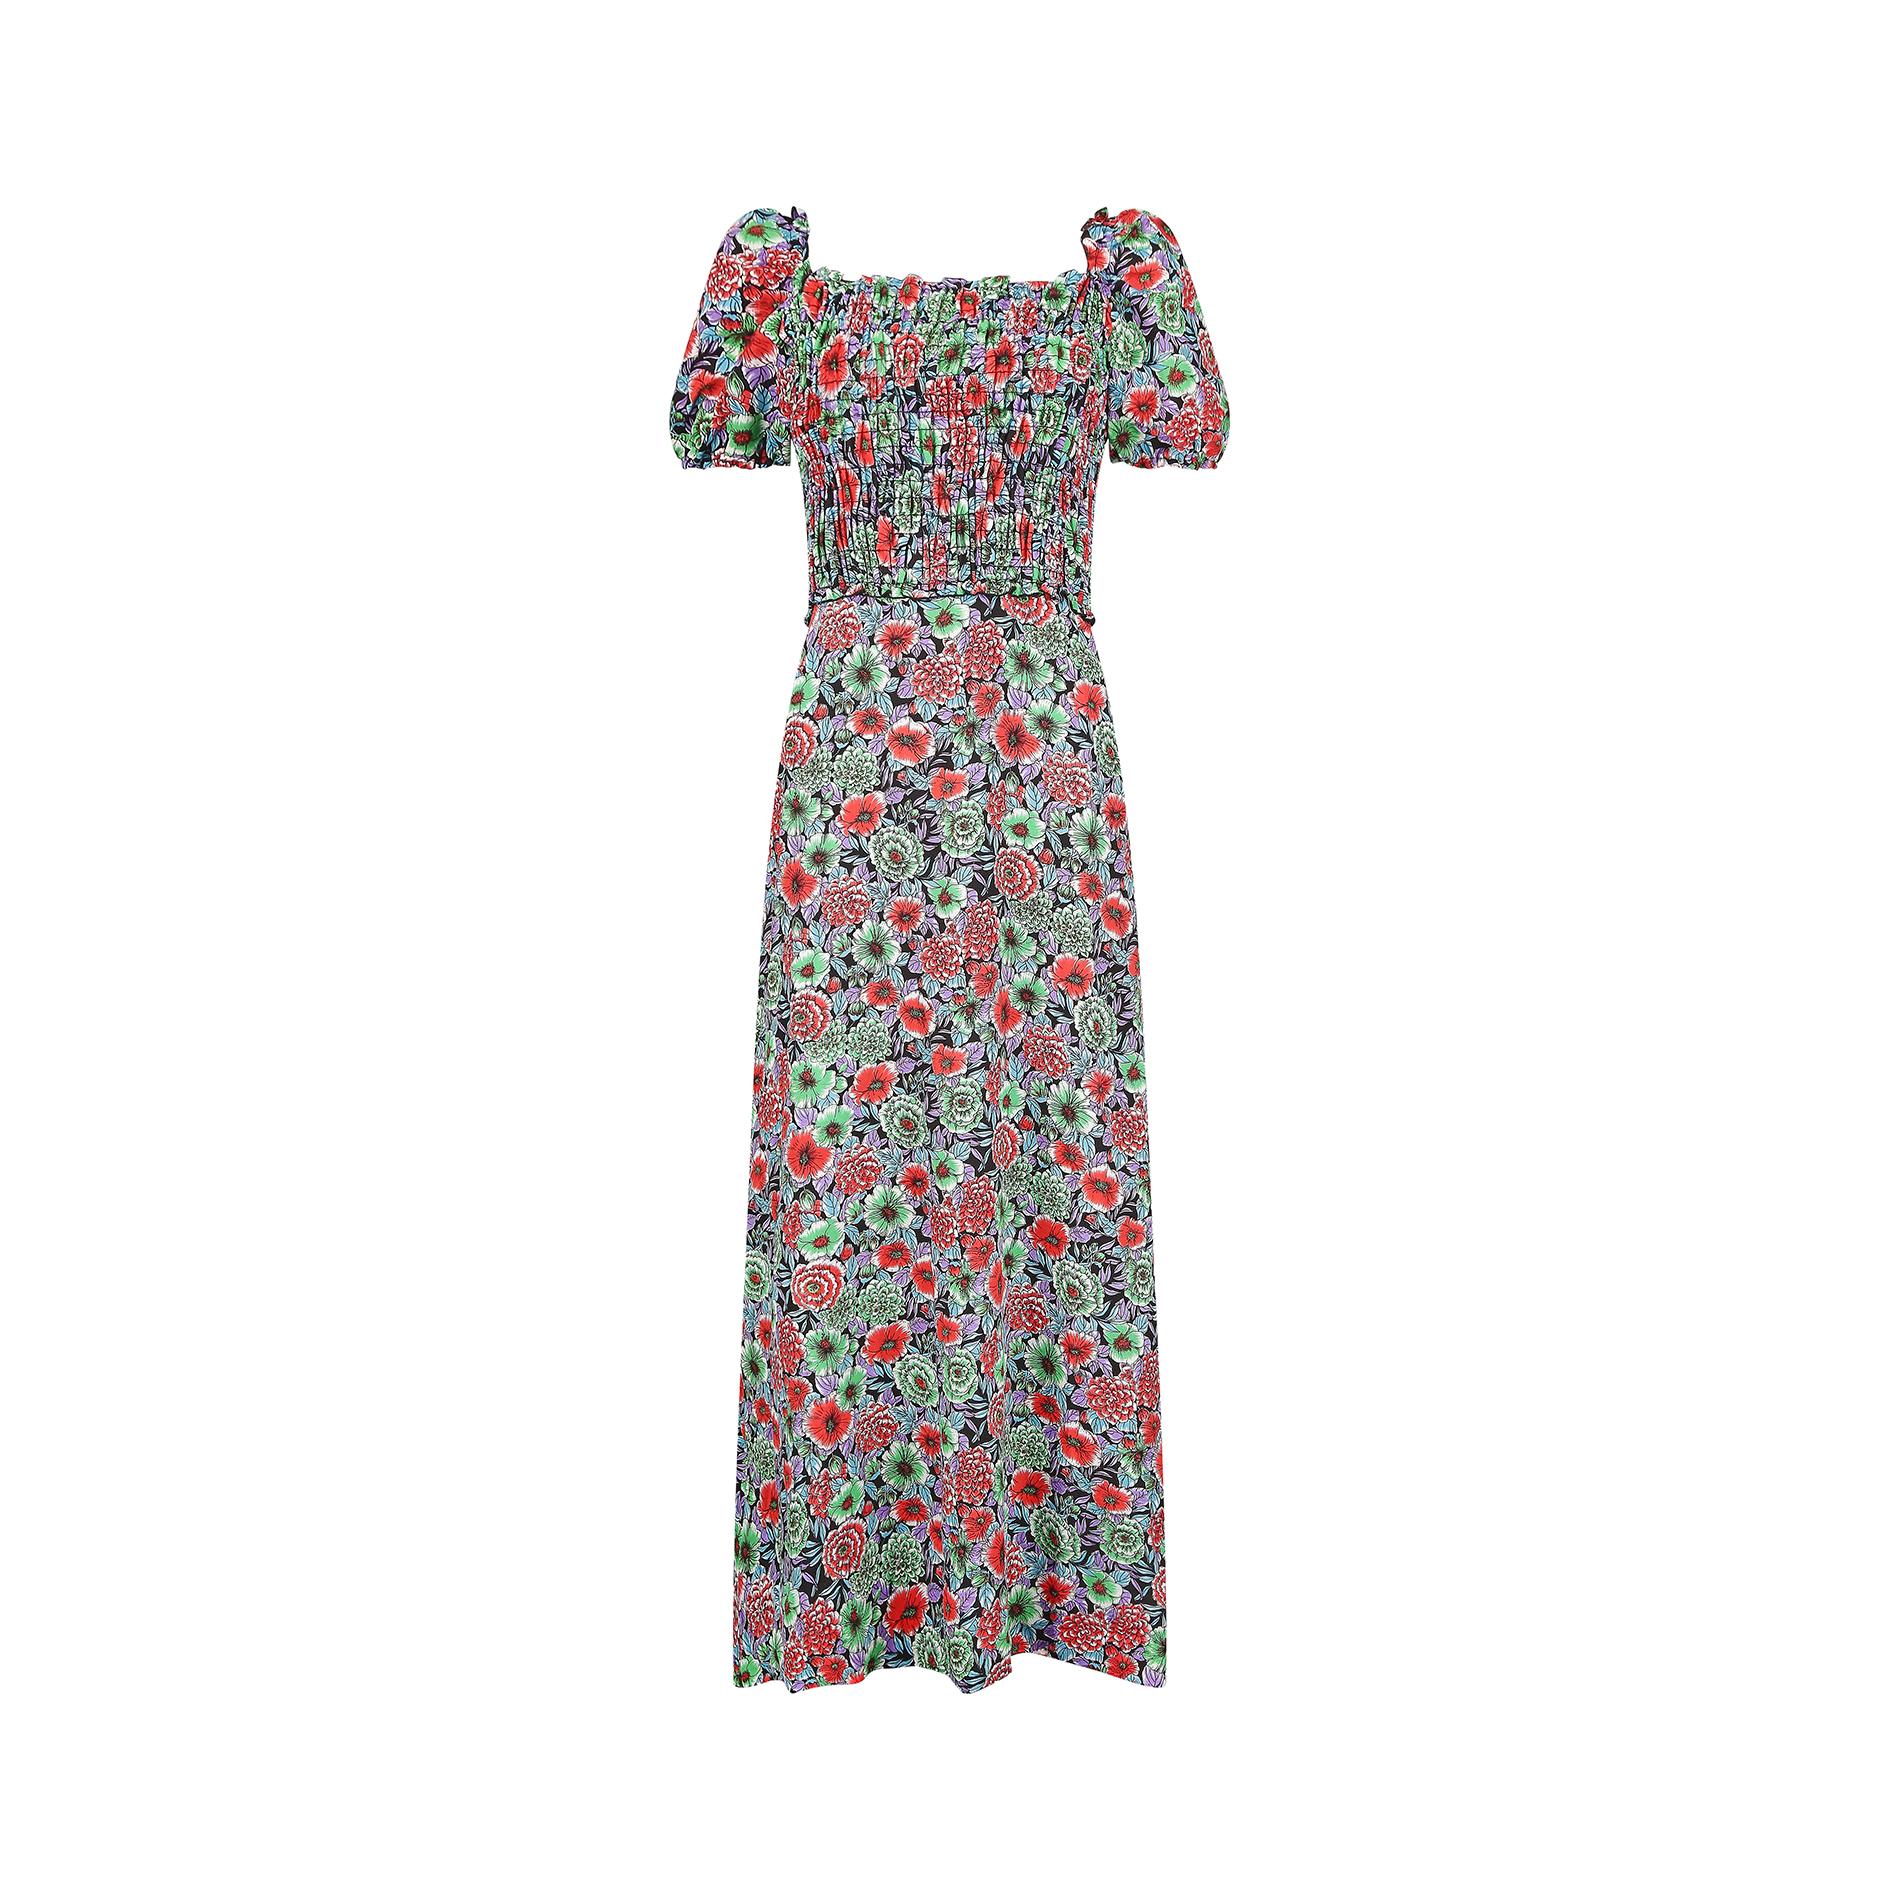 1970s floral maxi dress and a stylish high street adaption of the 'peasant chic' designs which are synonymous with the hippy trend which prevailed throughout the decade.  Featuring a square neckline and a smocked bust section for the perfect